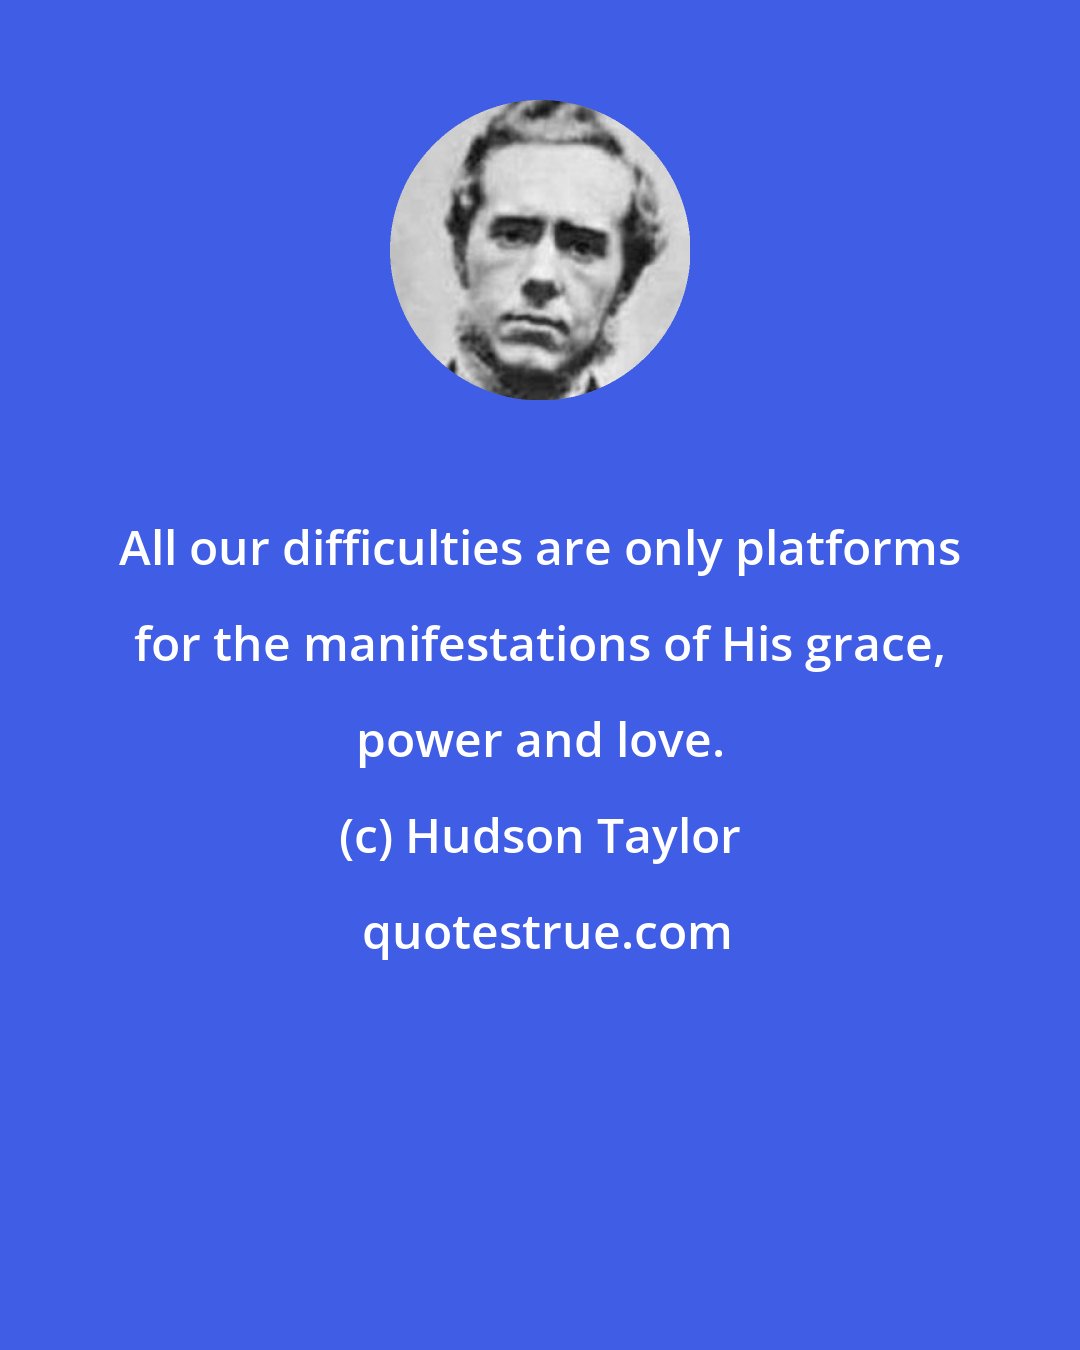 Hudson Taylor: All our difficulties are only platforms for the manifestations of His grace, power and love.